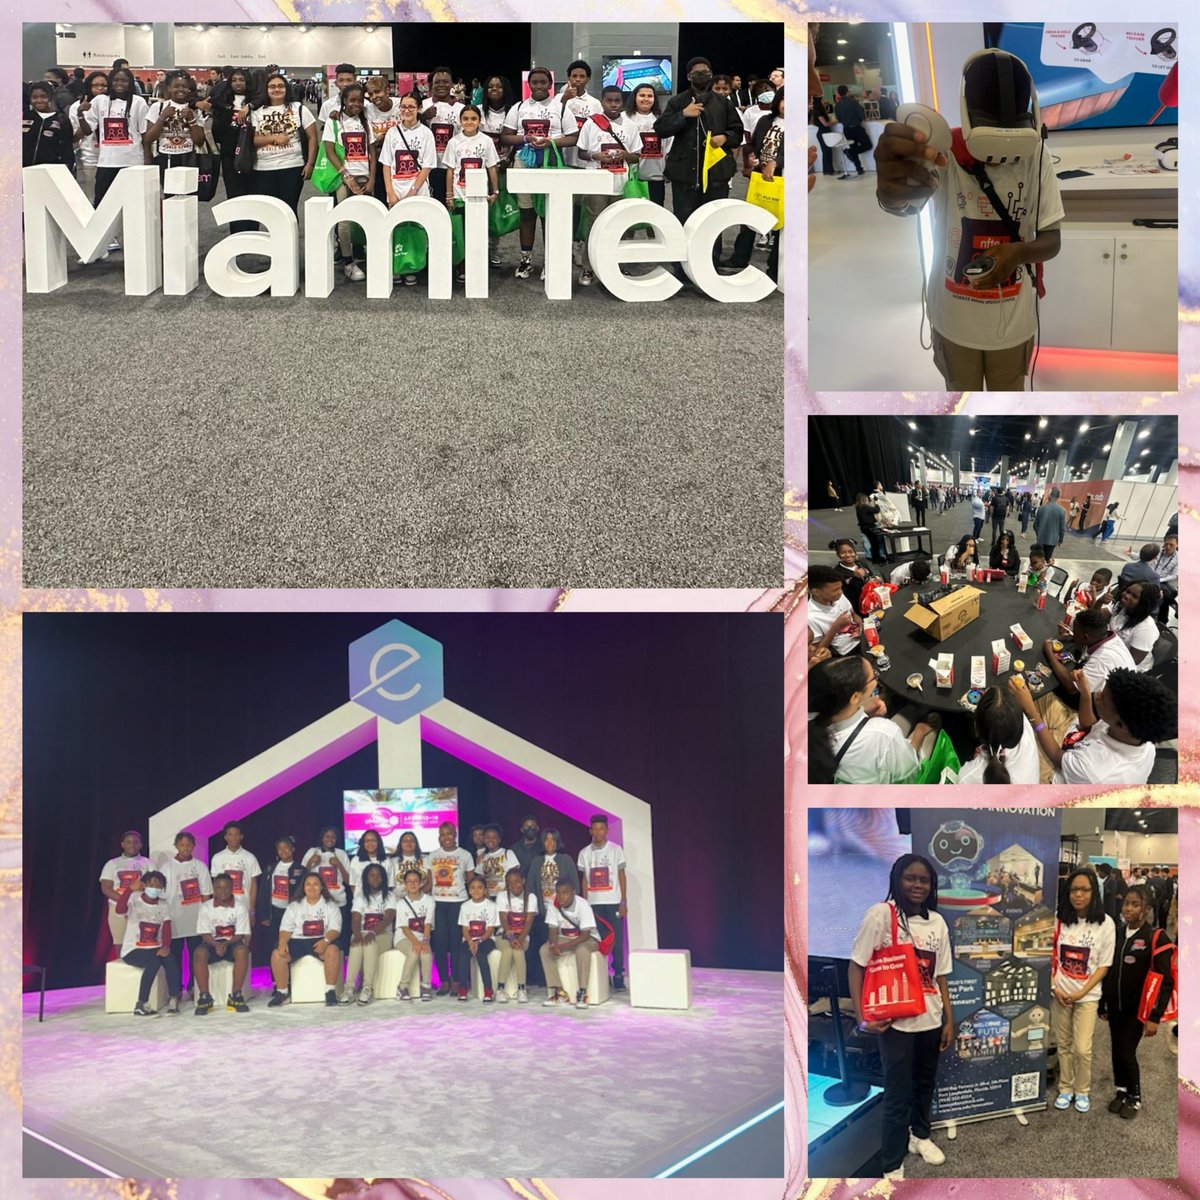 @KRStokes16 so proud of your dedication & passion to expose @HoraceMannmdcps students to the tech world #eMerge #AmericaGlobal #TechConference #2024 @SuptDotres @MjLewis13 @DavidPiccolino @MDCPSSTEAM @MDCPSCentral @CTEMiami @MDCPS 👏🏽 💻🖲️🎮🤖